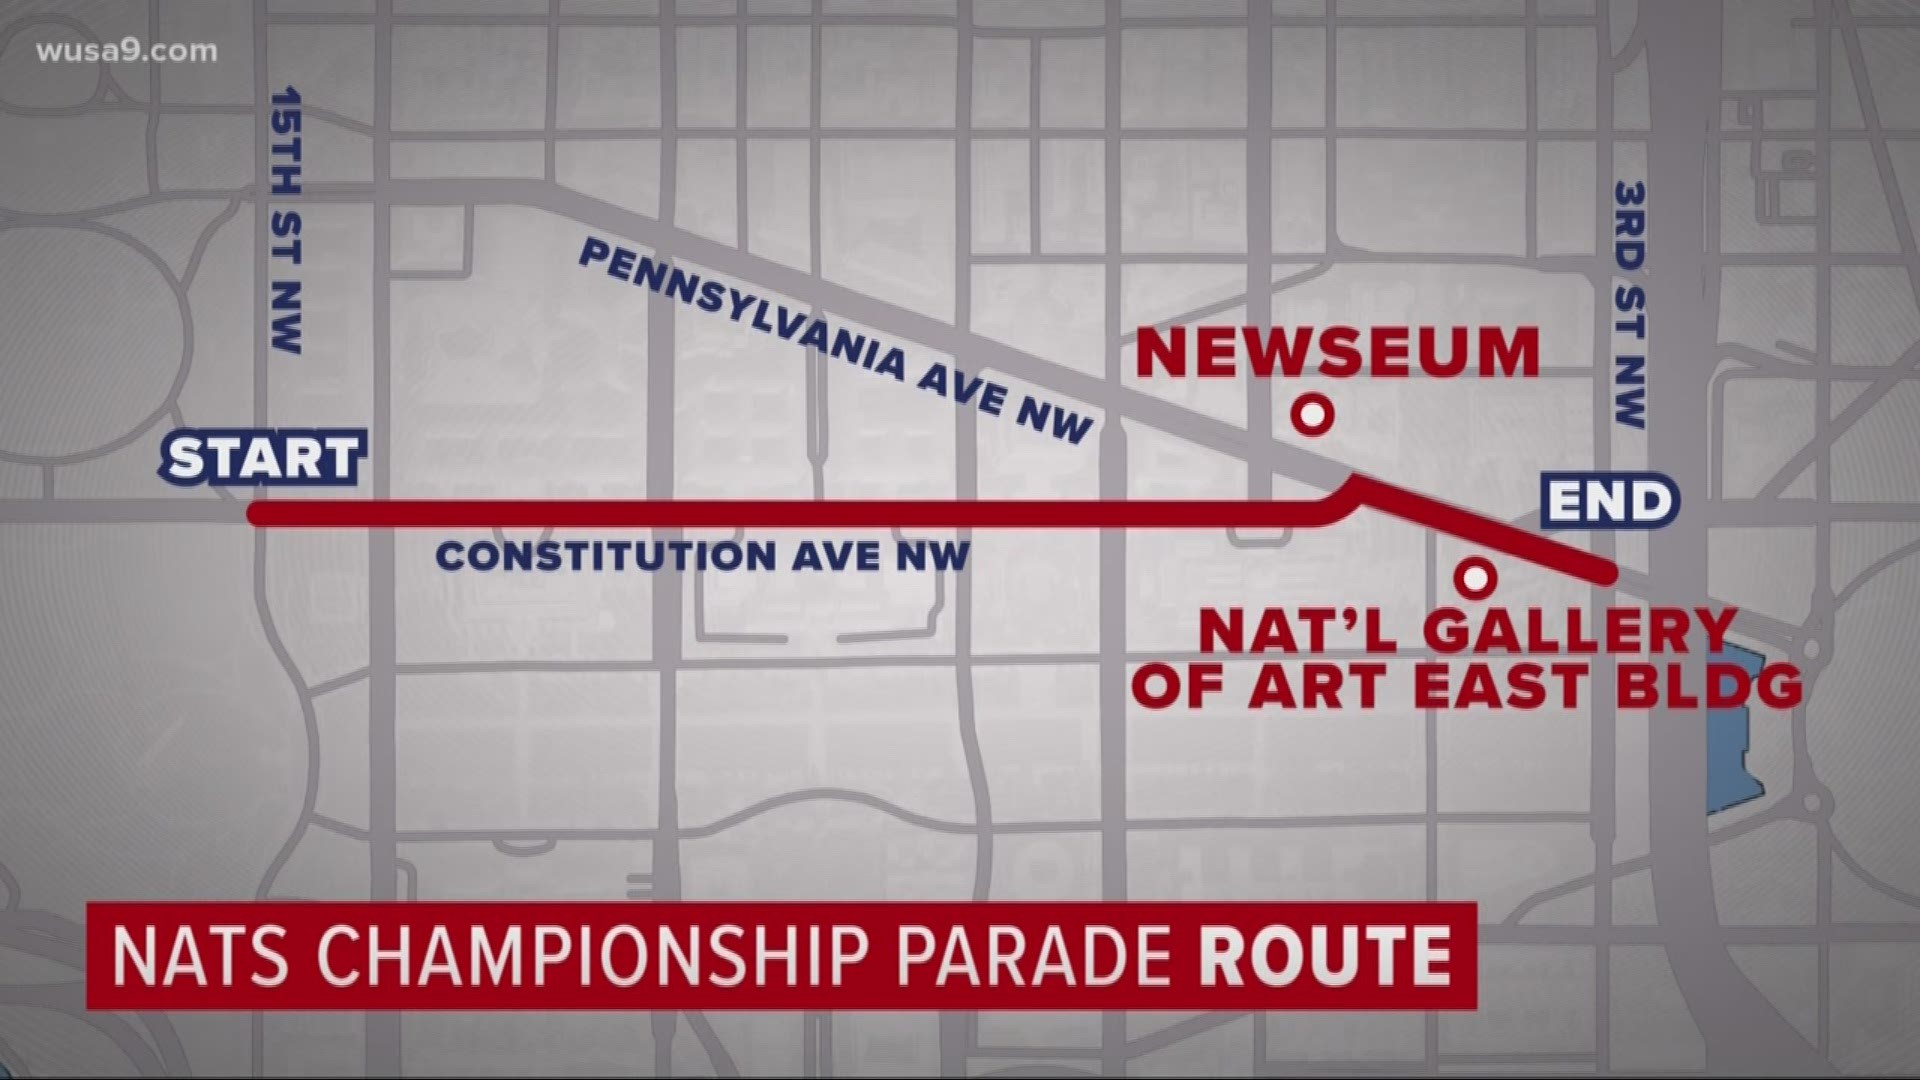 Metro will run extra service for Nationals' Championship Parade